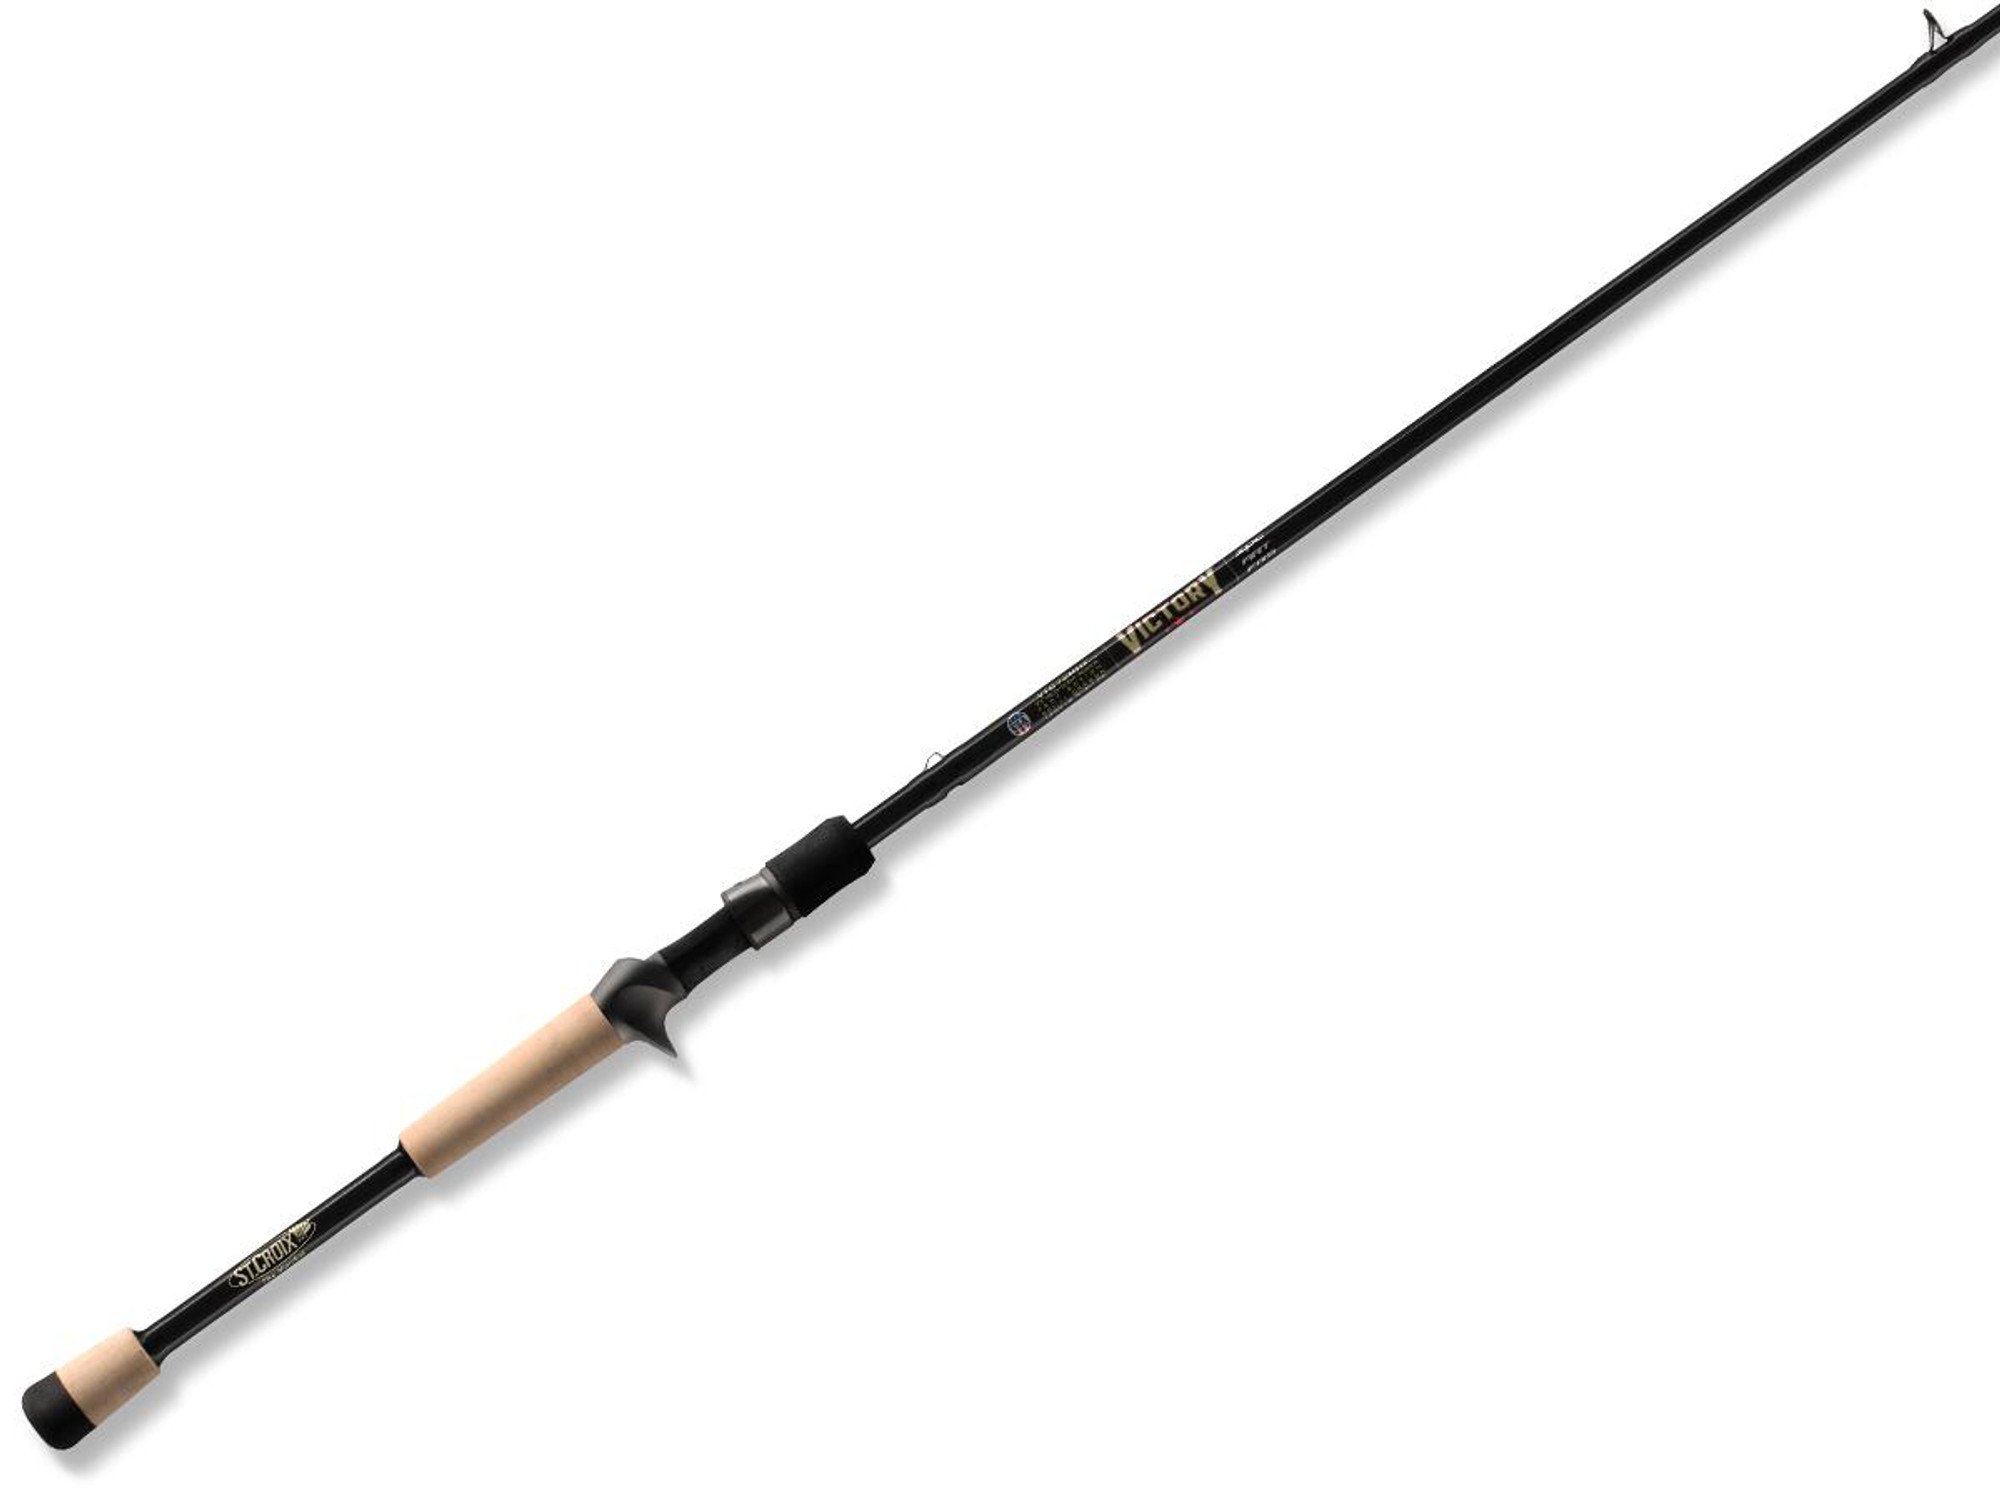 St. Croix Rods Victory Casting Fishing Rod (Model: VTC71MHF)